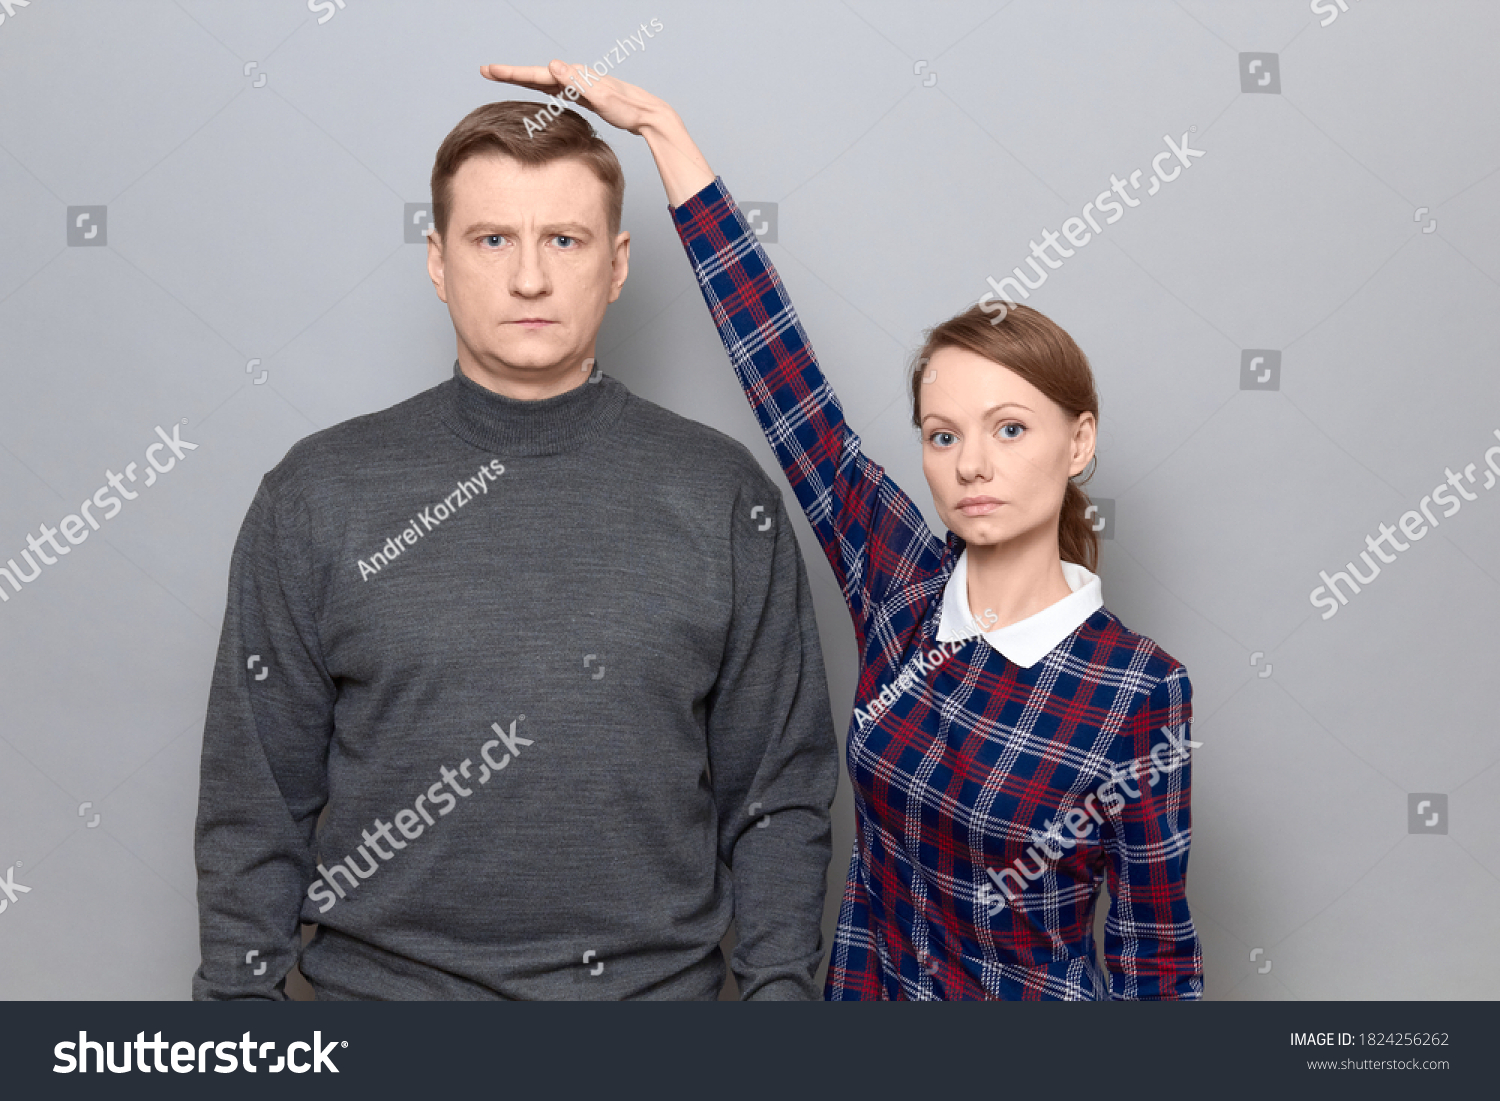 Studio shot of short woman standing on tiptoes and showing height of tall man, both are with serious expressions, over gray background. Concept of diversity of people's heights, tall and short persons #1824256262